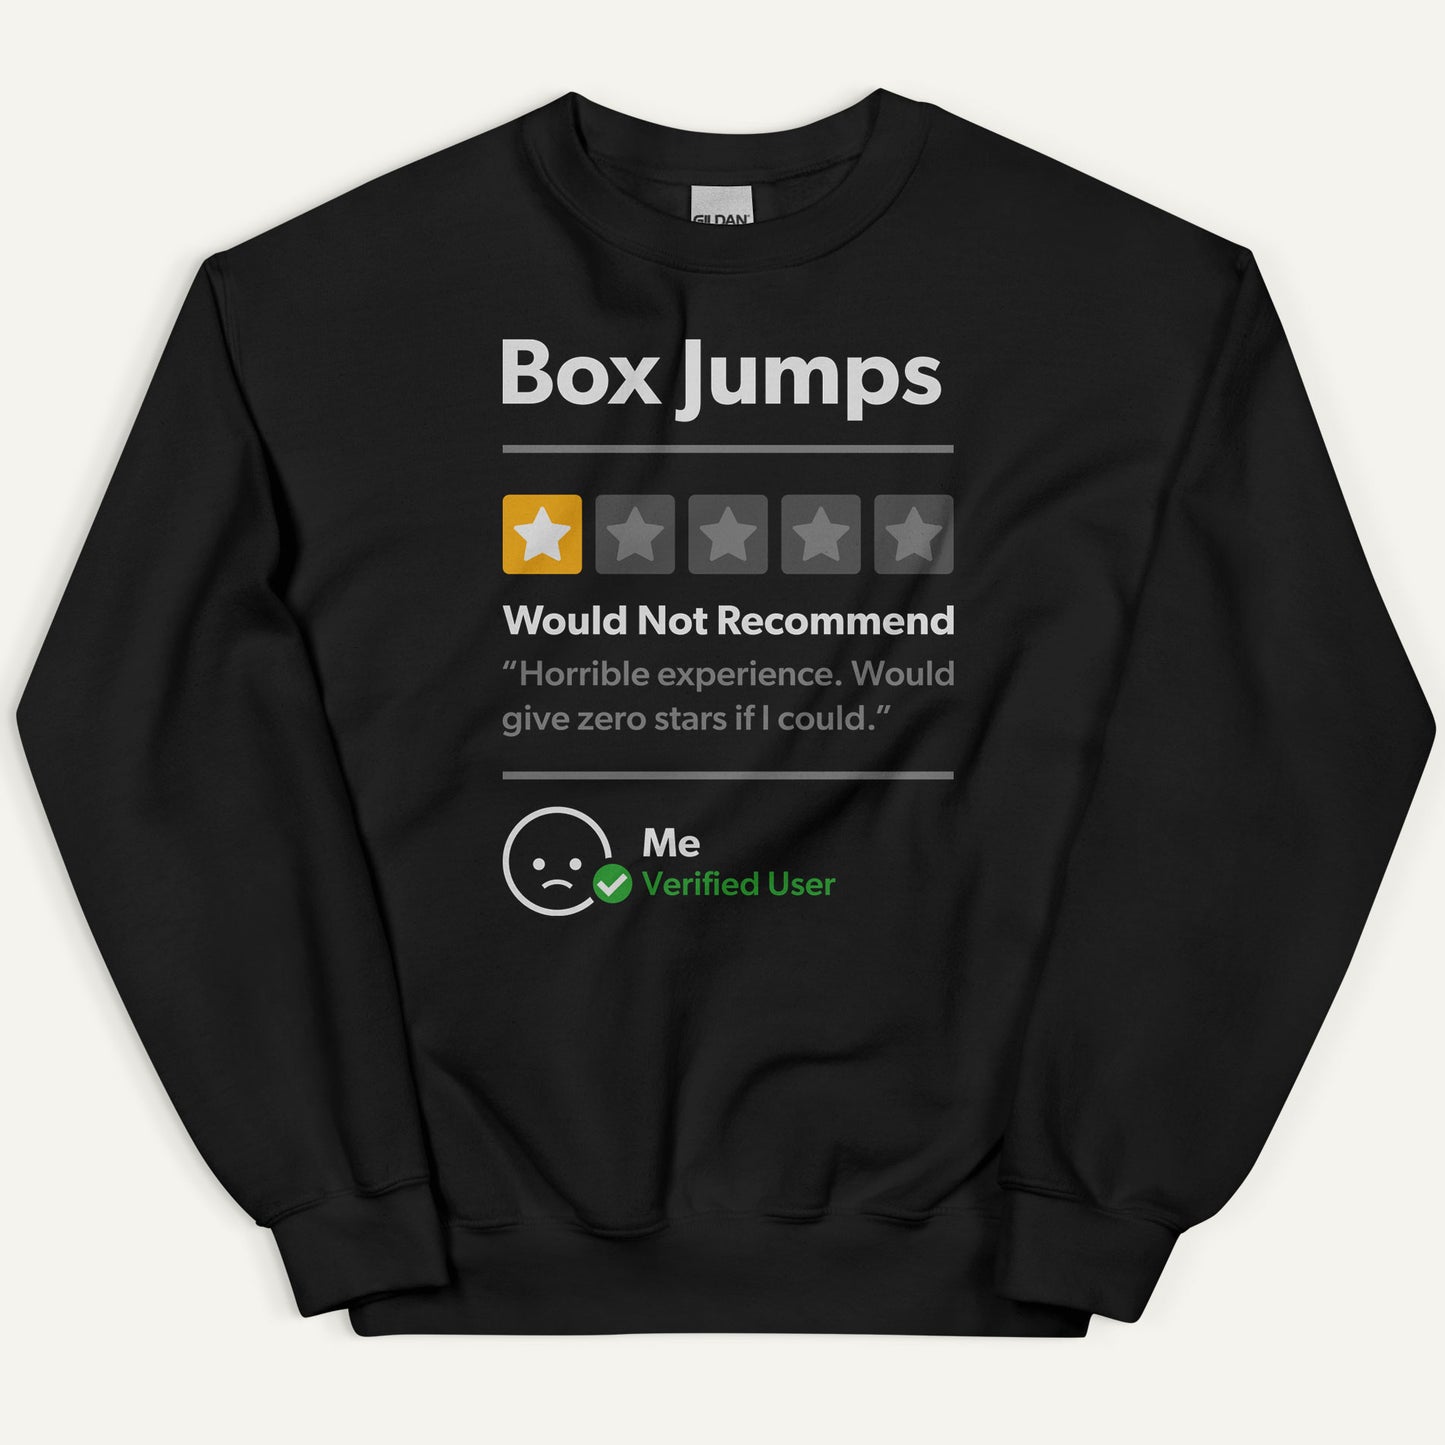 Box Jumps 1 Star Would Not Recommend Sweatshirt